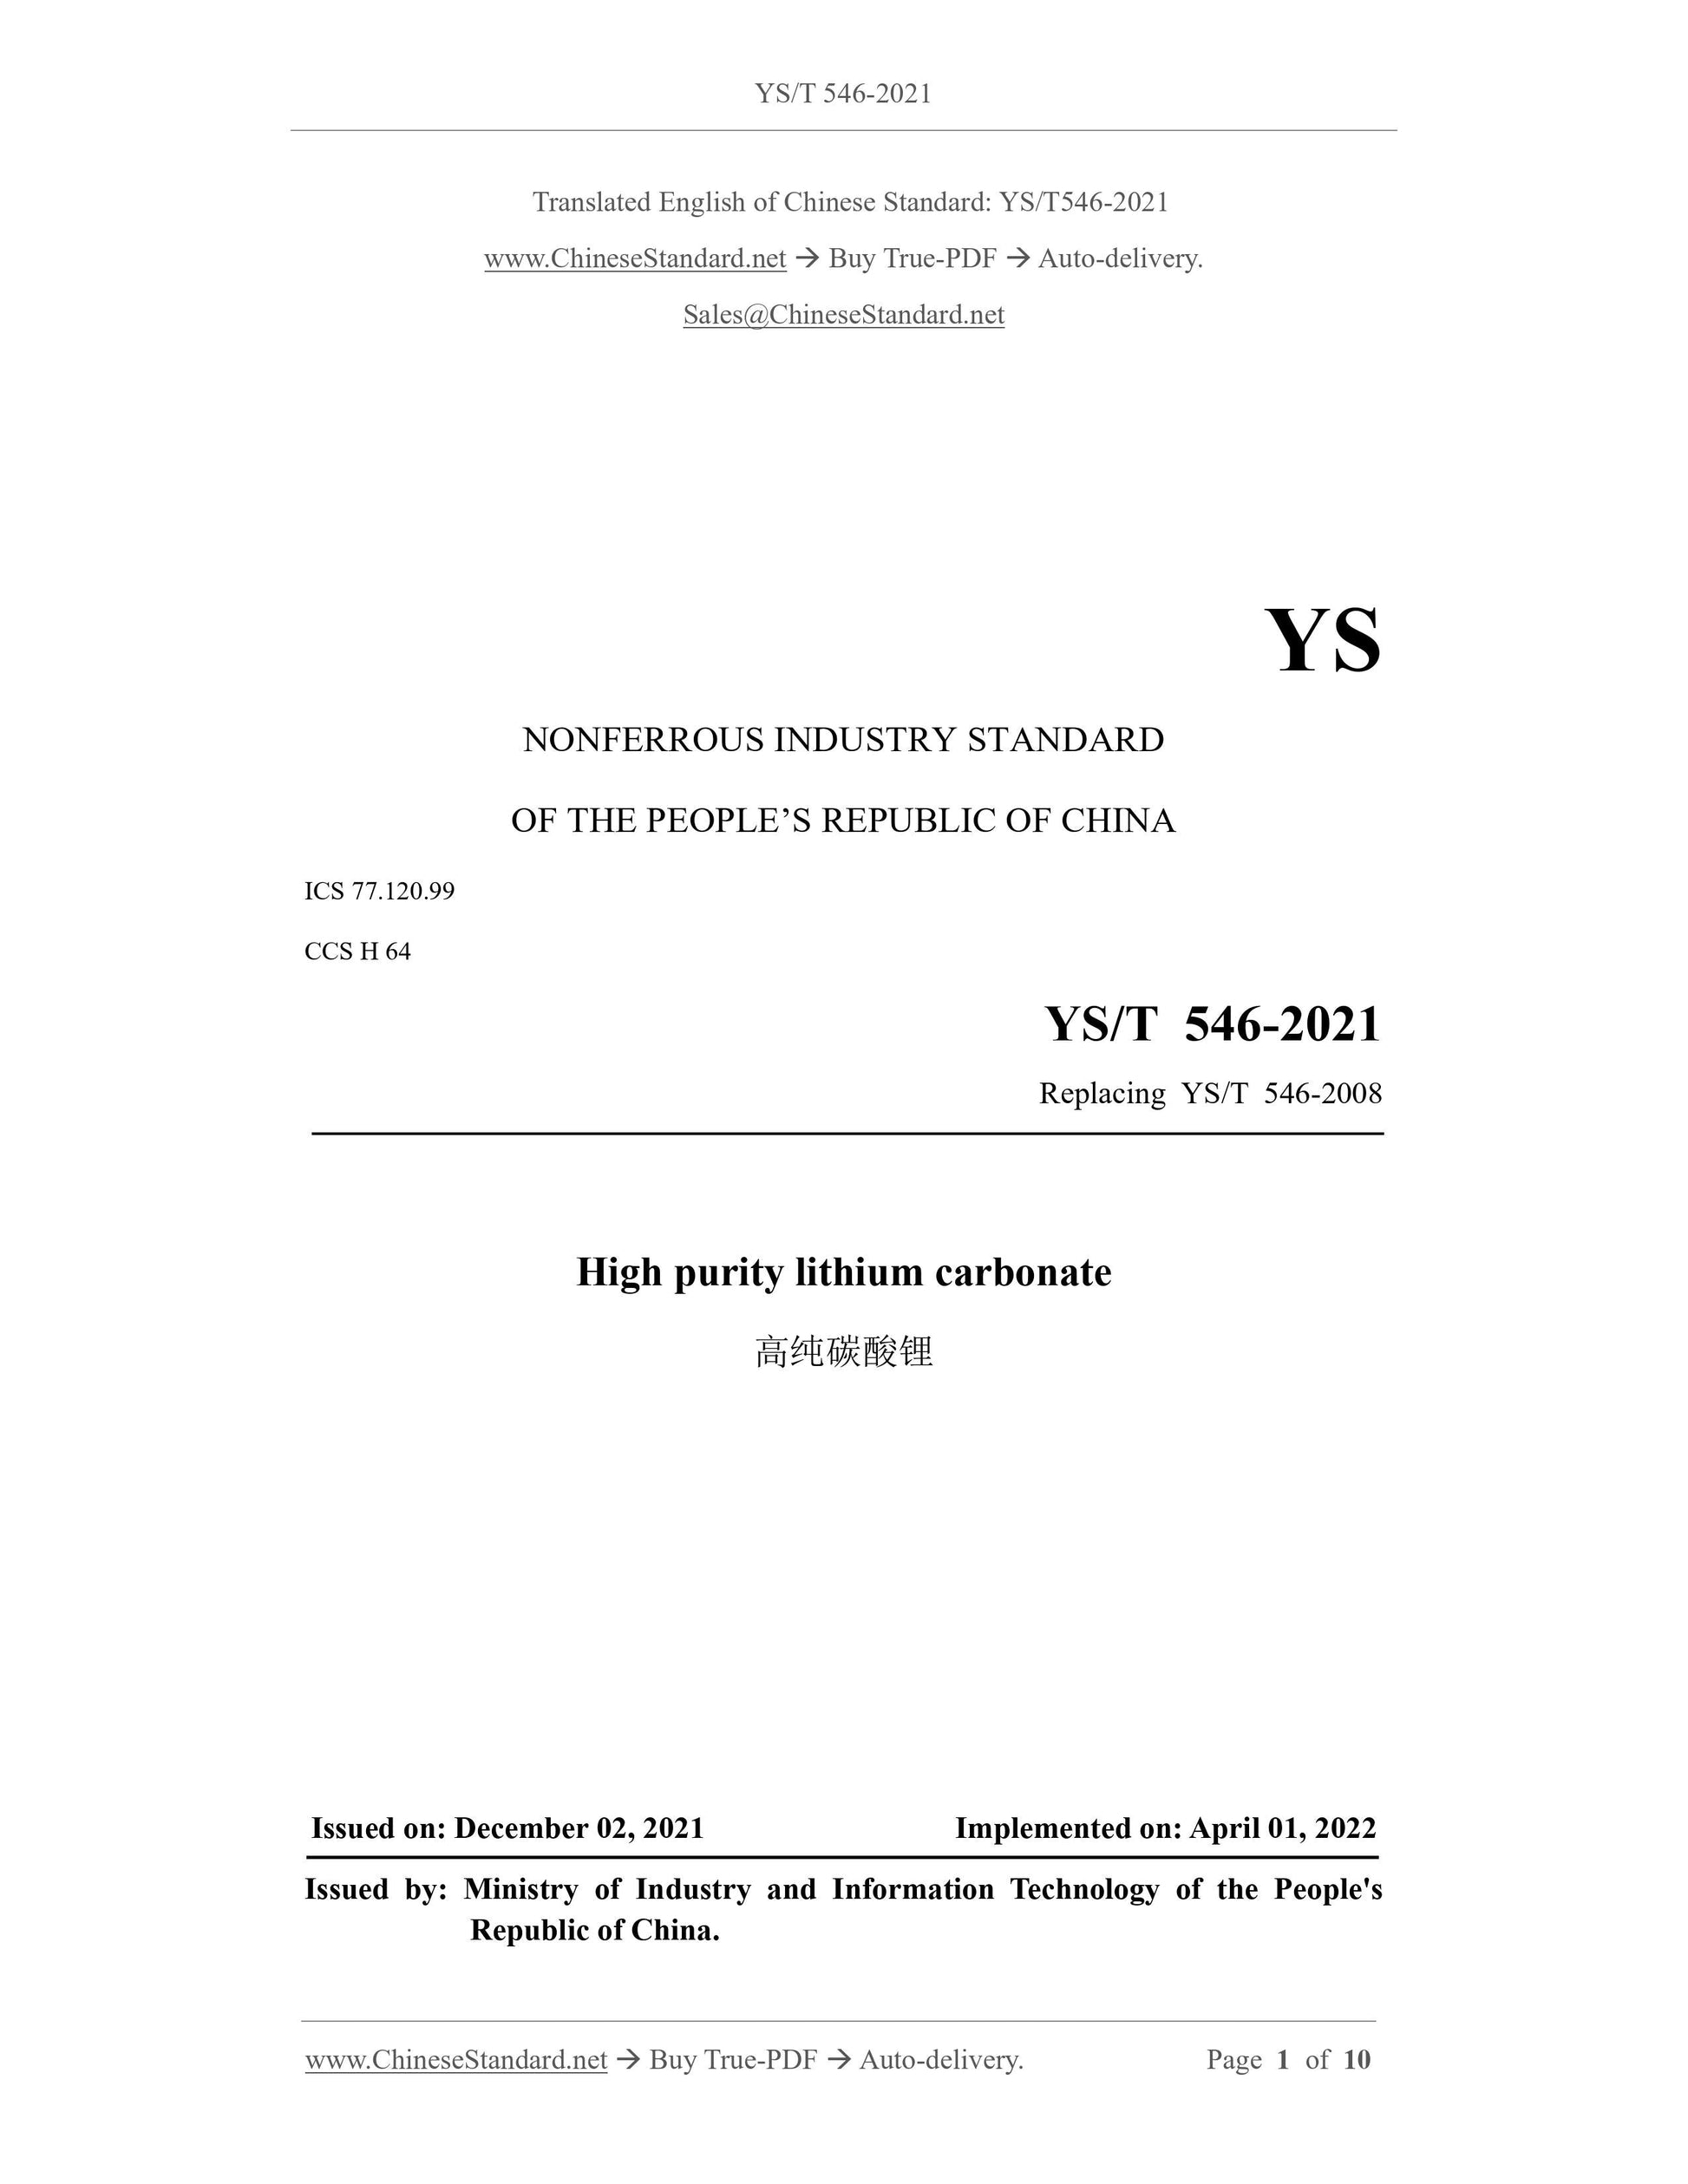 YS/T 546-2021 Page 1